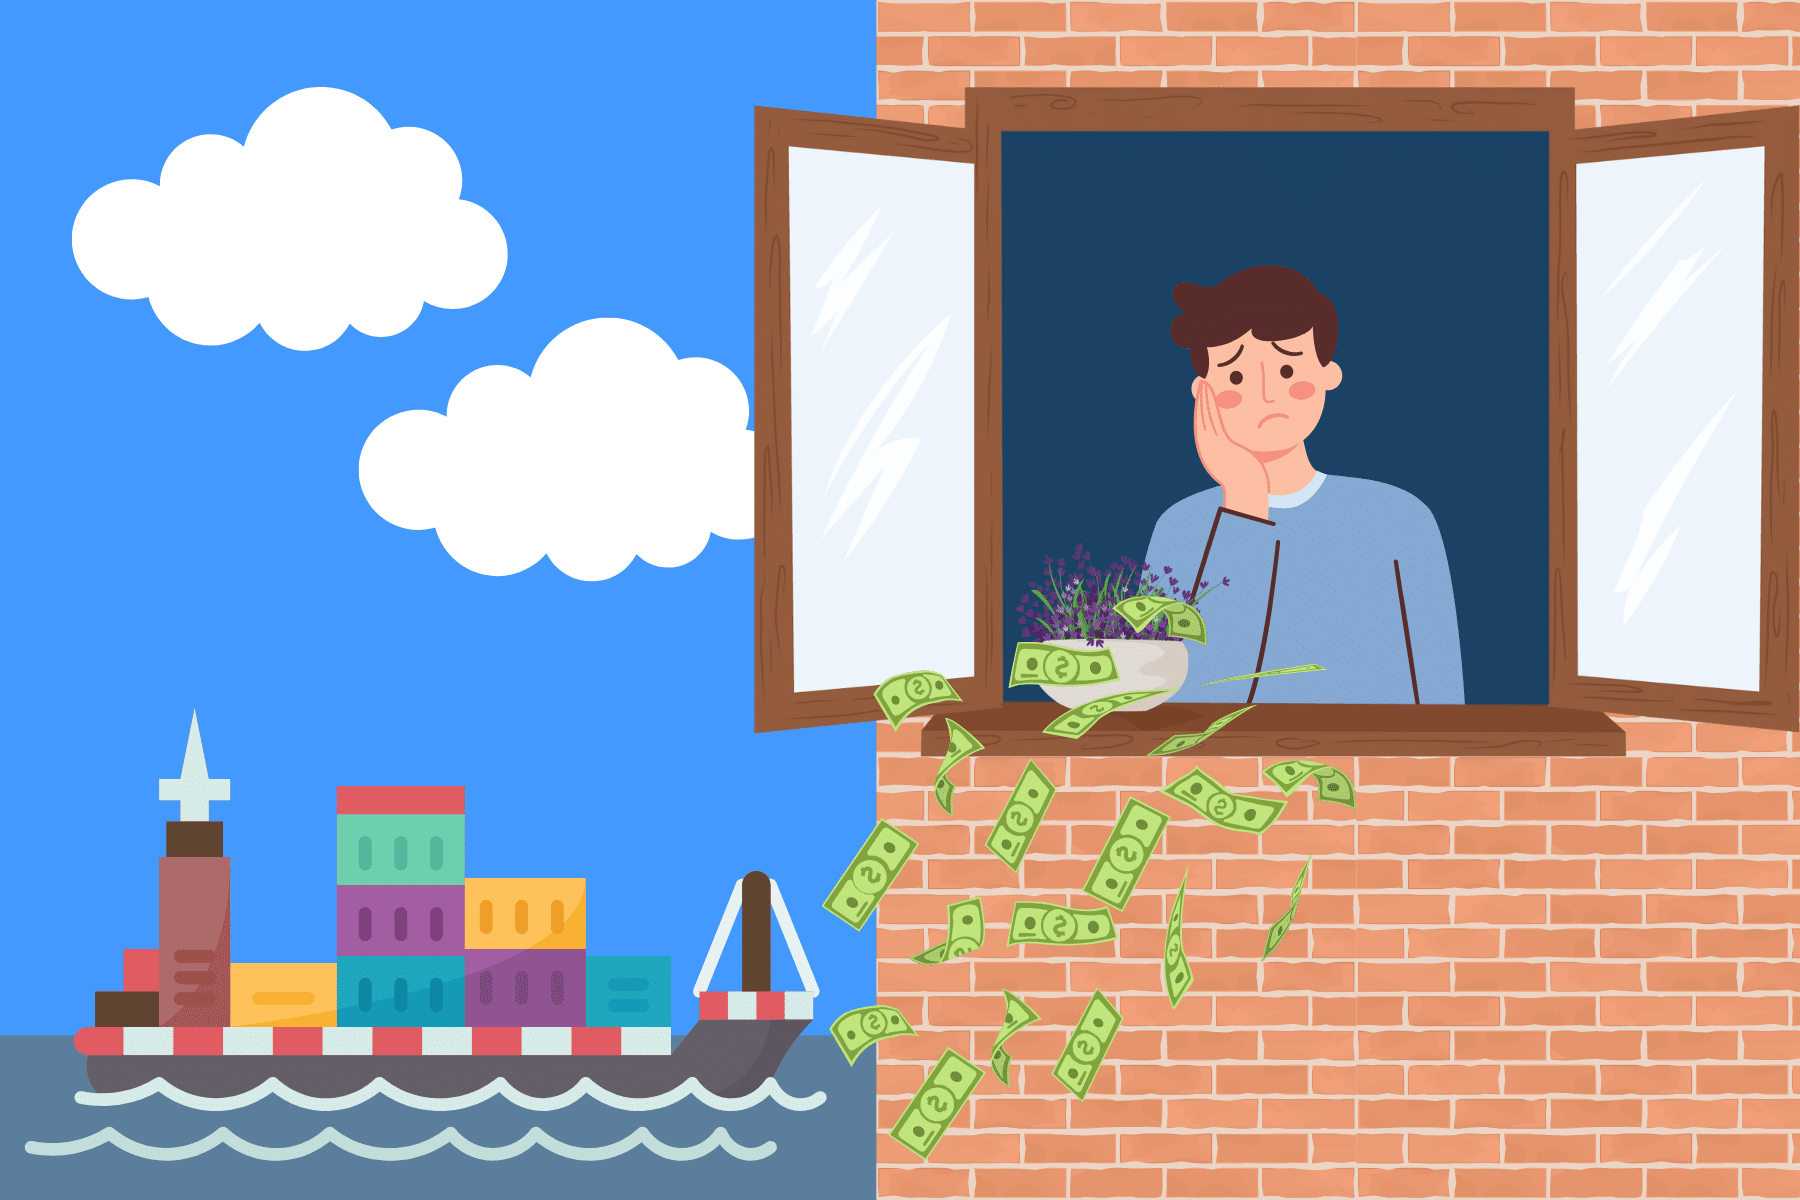 Illustration of a person with a worried face standing at an open window, out of which money is flying. The background features a cargo vessel on the water. The sky is blue with white clouds, and the wall where the window is installed is made of red bricks.